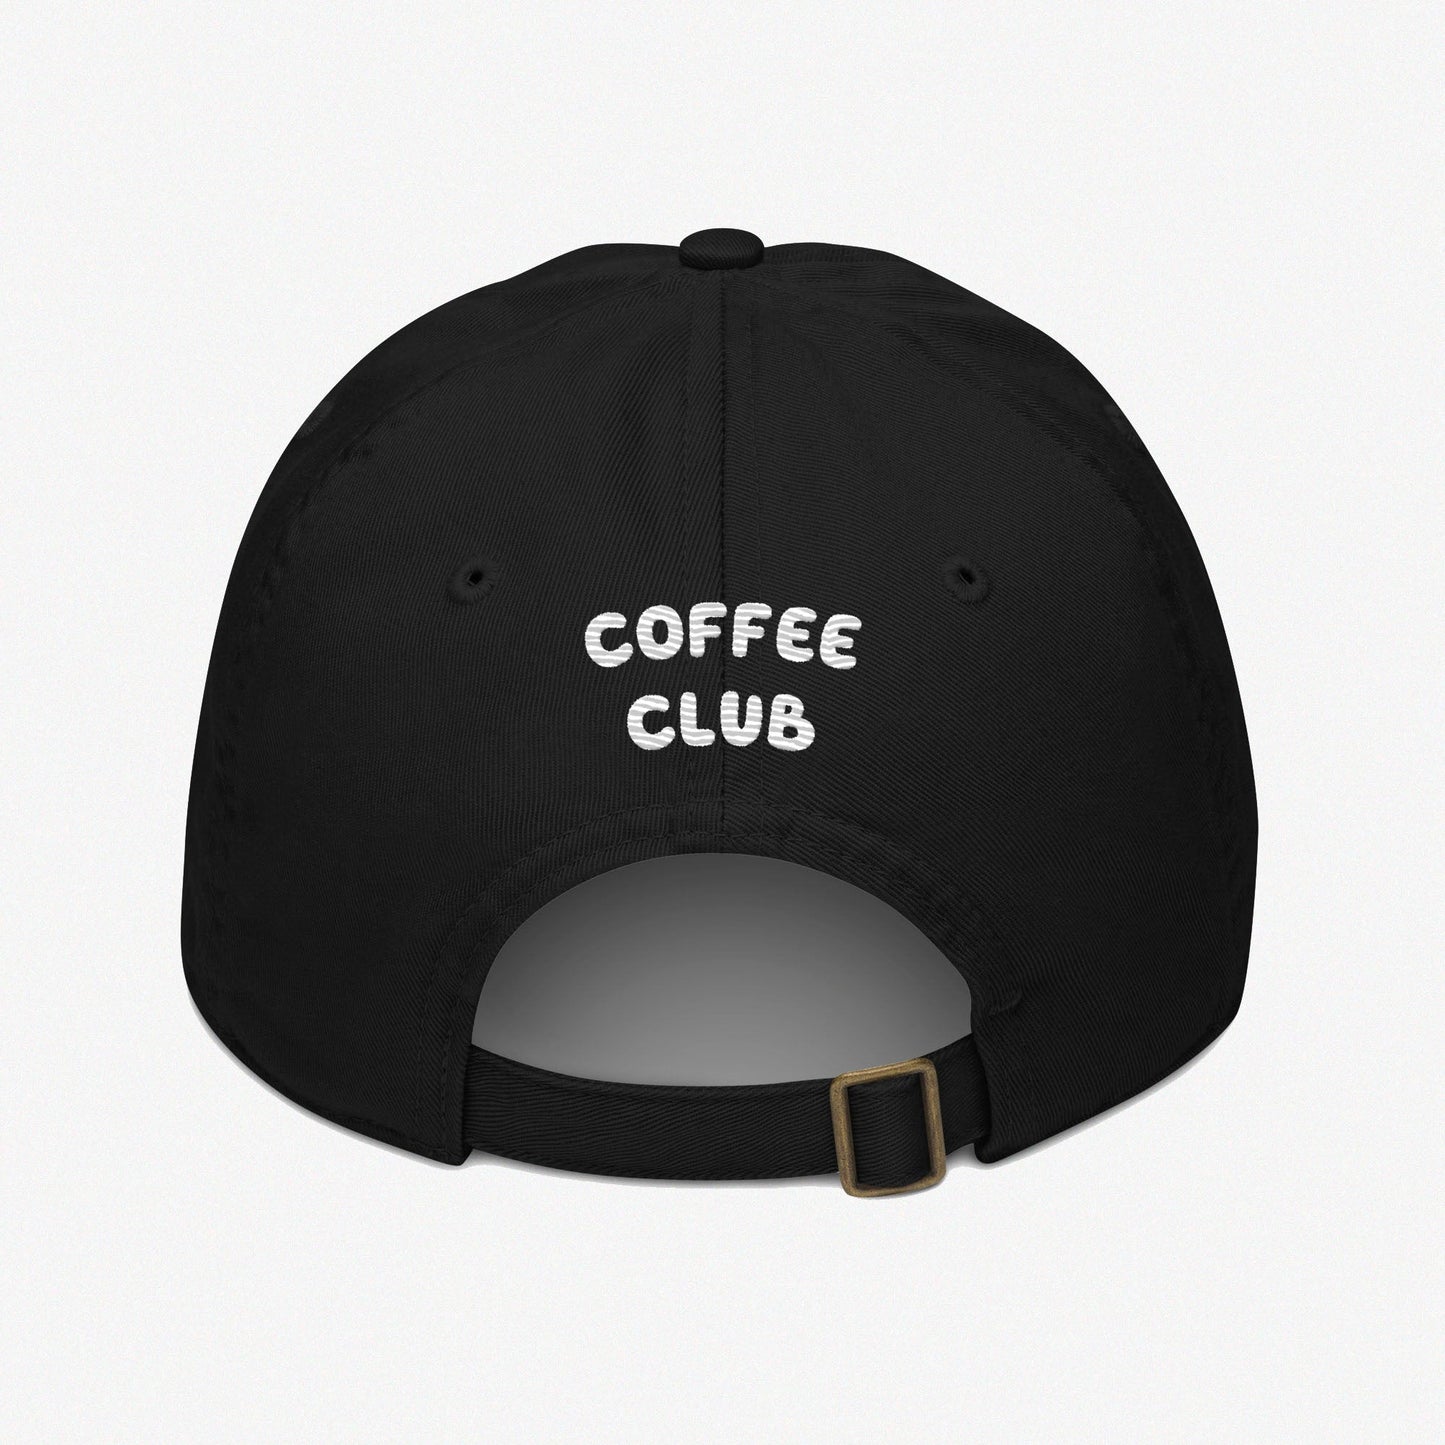 Coffee club black dad hat with embroidered coffee club caption